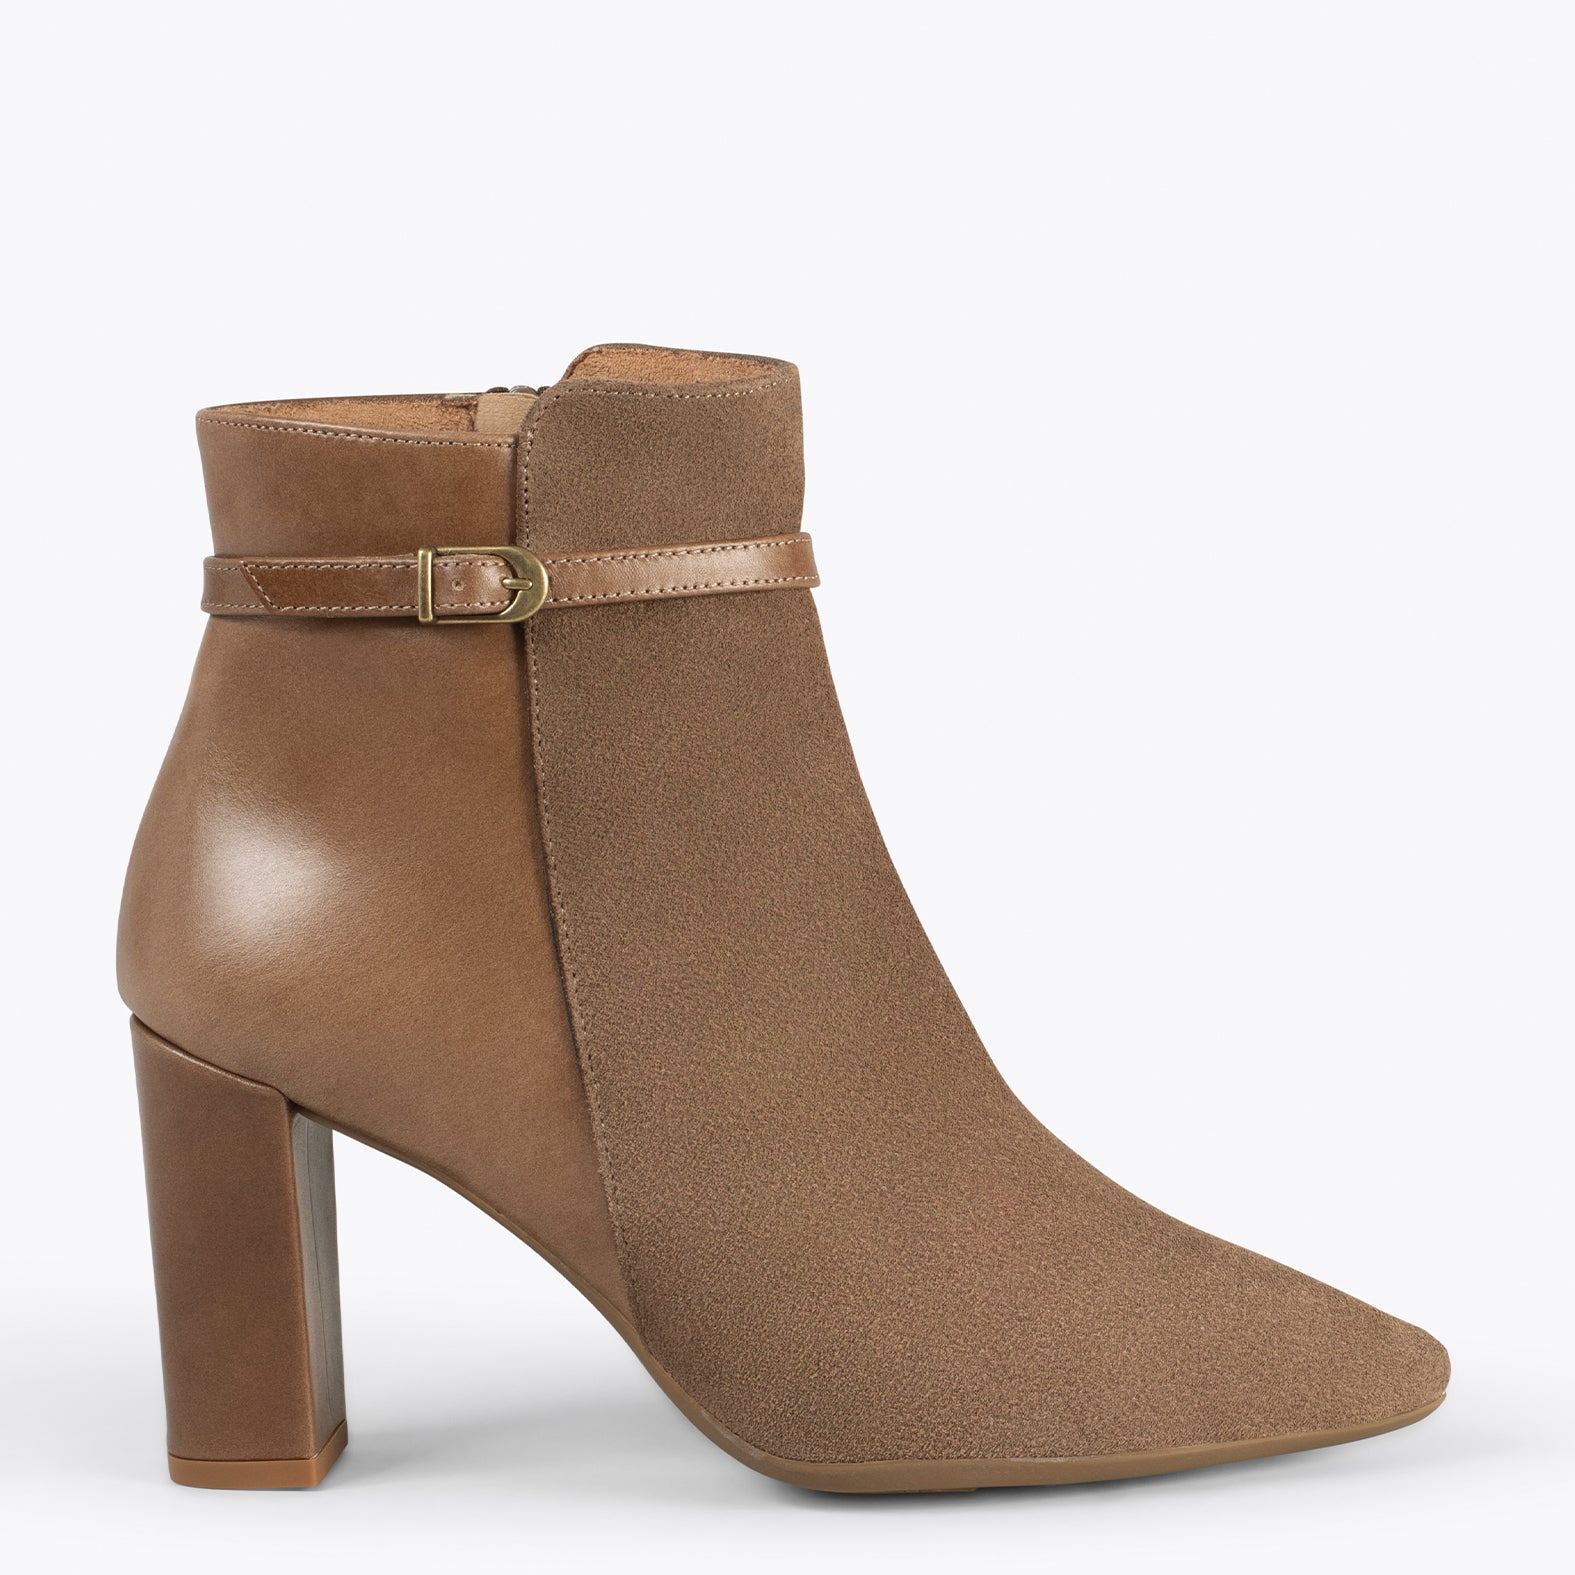 PRAGUE – TAUPE high heel bootie with combined leather